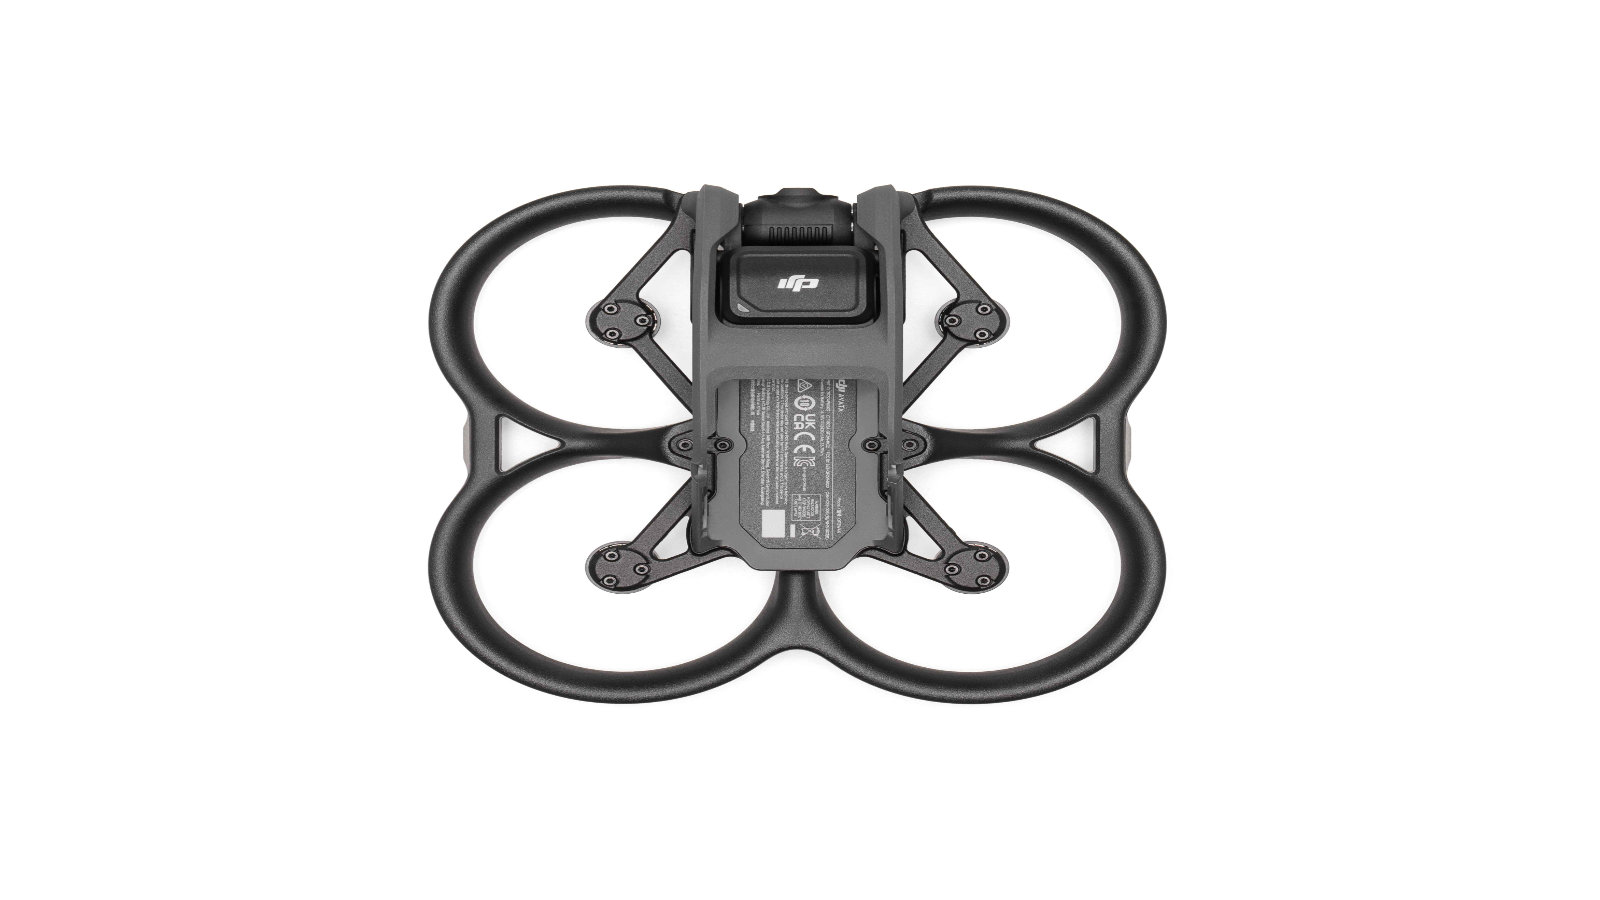 DJI Avata official images